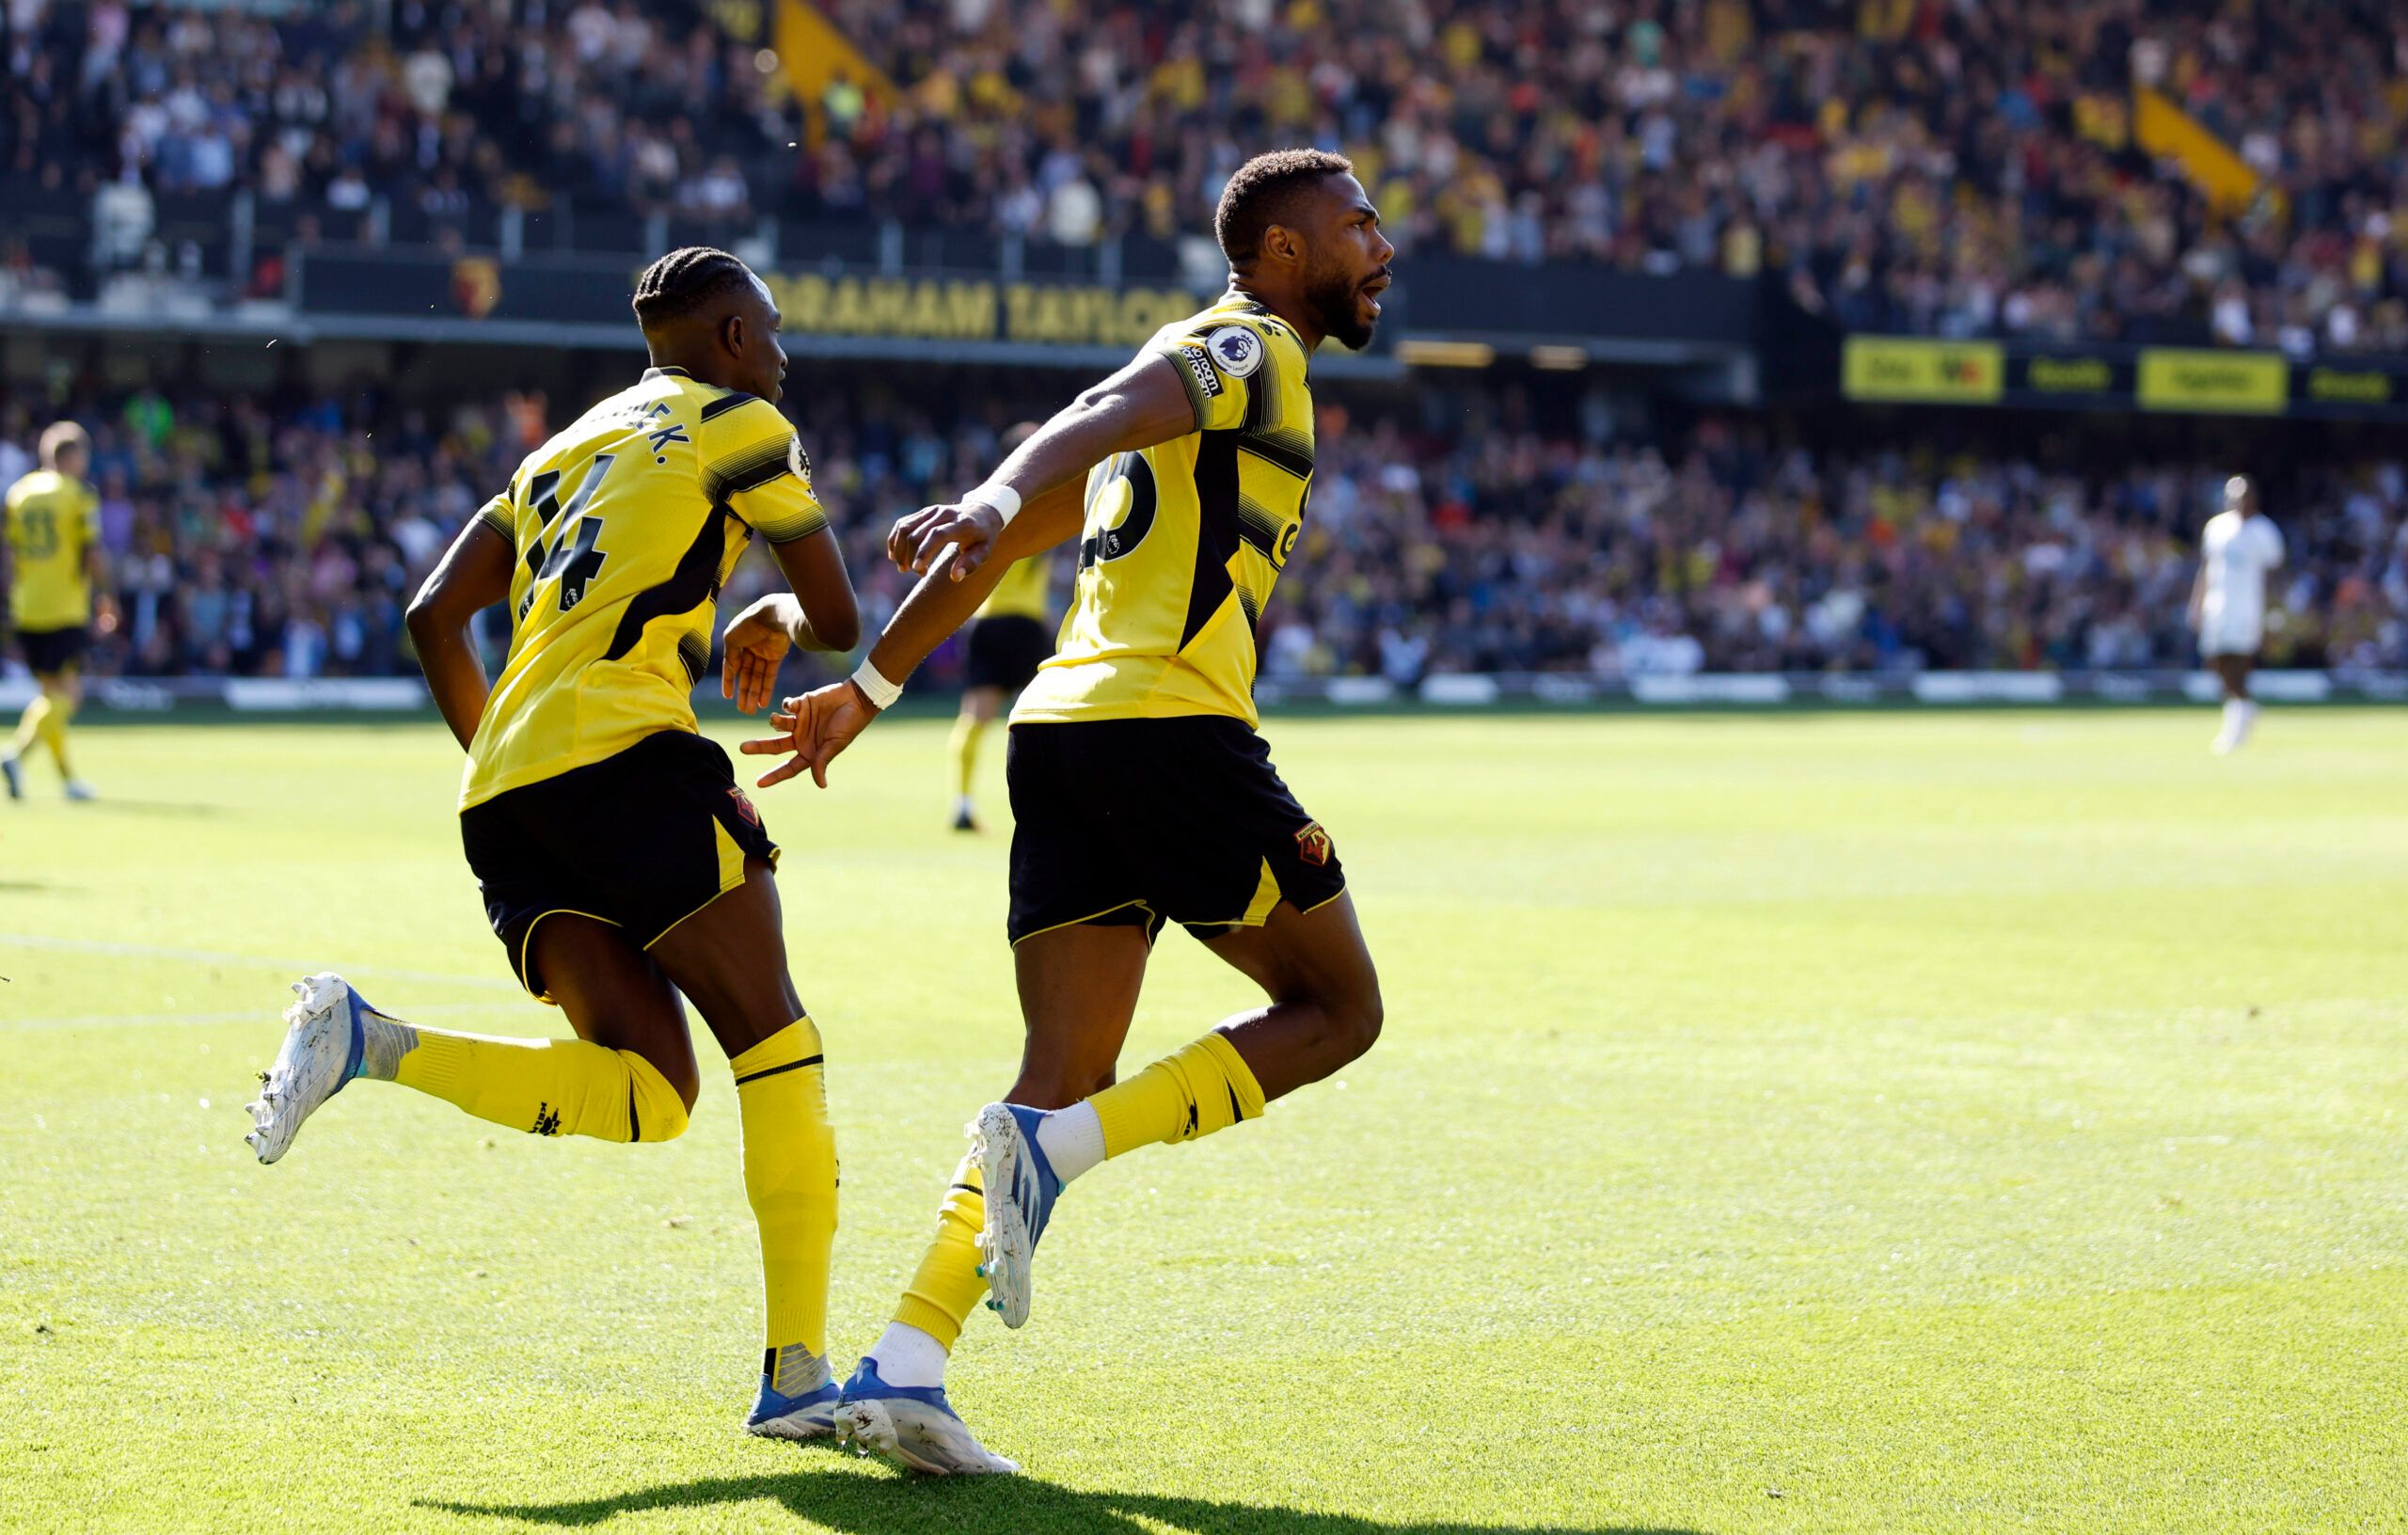 Soccer Football - Premier League - Watford v Brentford - Vicarage Road, Watford, Britain - April 16, 2022 Watford's Emmanuel Dennis celebrates scoring their first goal Action Images via Reuters/Peter Cziborra EDITORIAL USE ONLY. No use with unauthorized audio, video, data, fixture lists, club/league logos or 'live' services. Online in-match use limited to 75 images, no video emulation. No use in betting, games or single club /league/player publications.  Please contact your account representativ